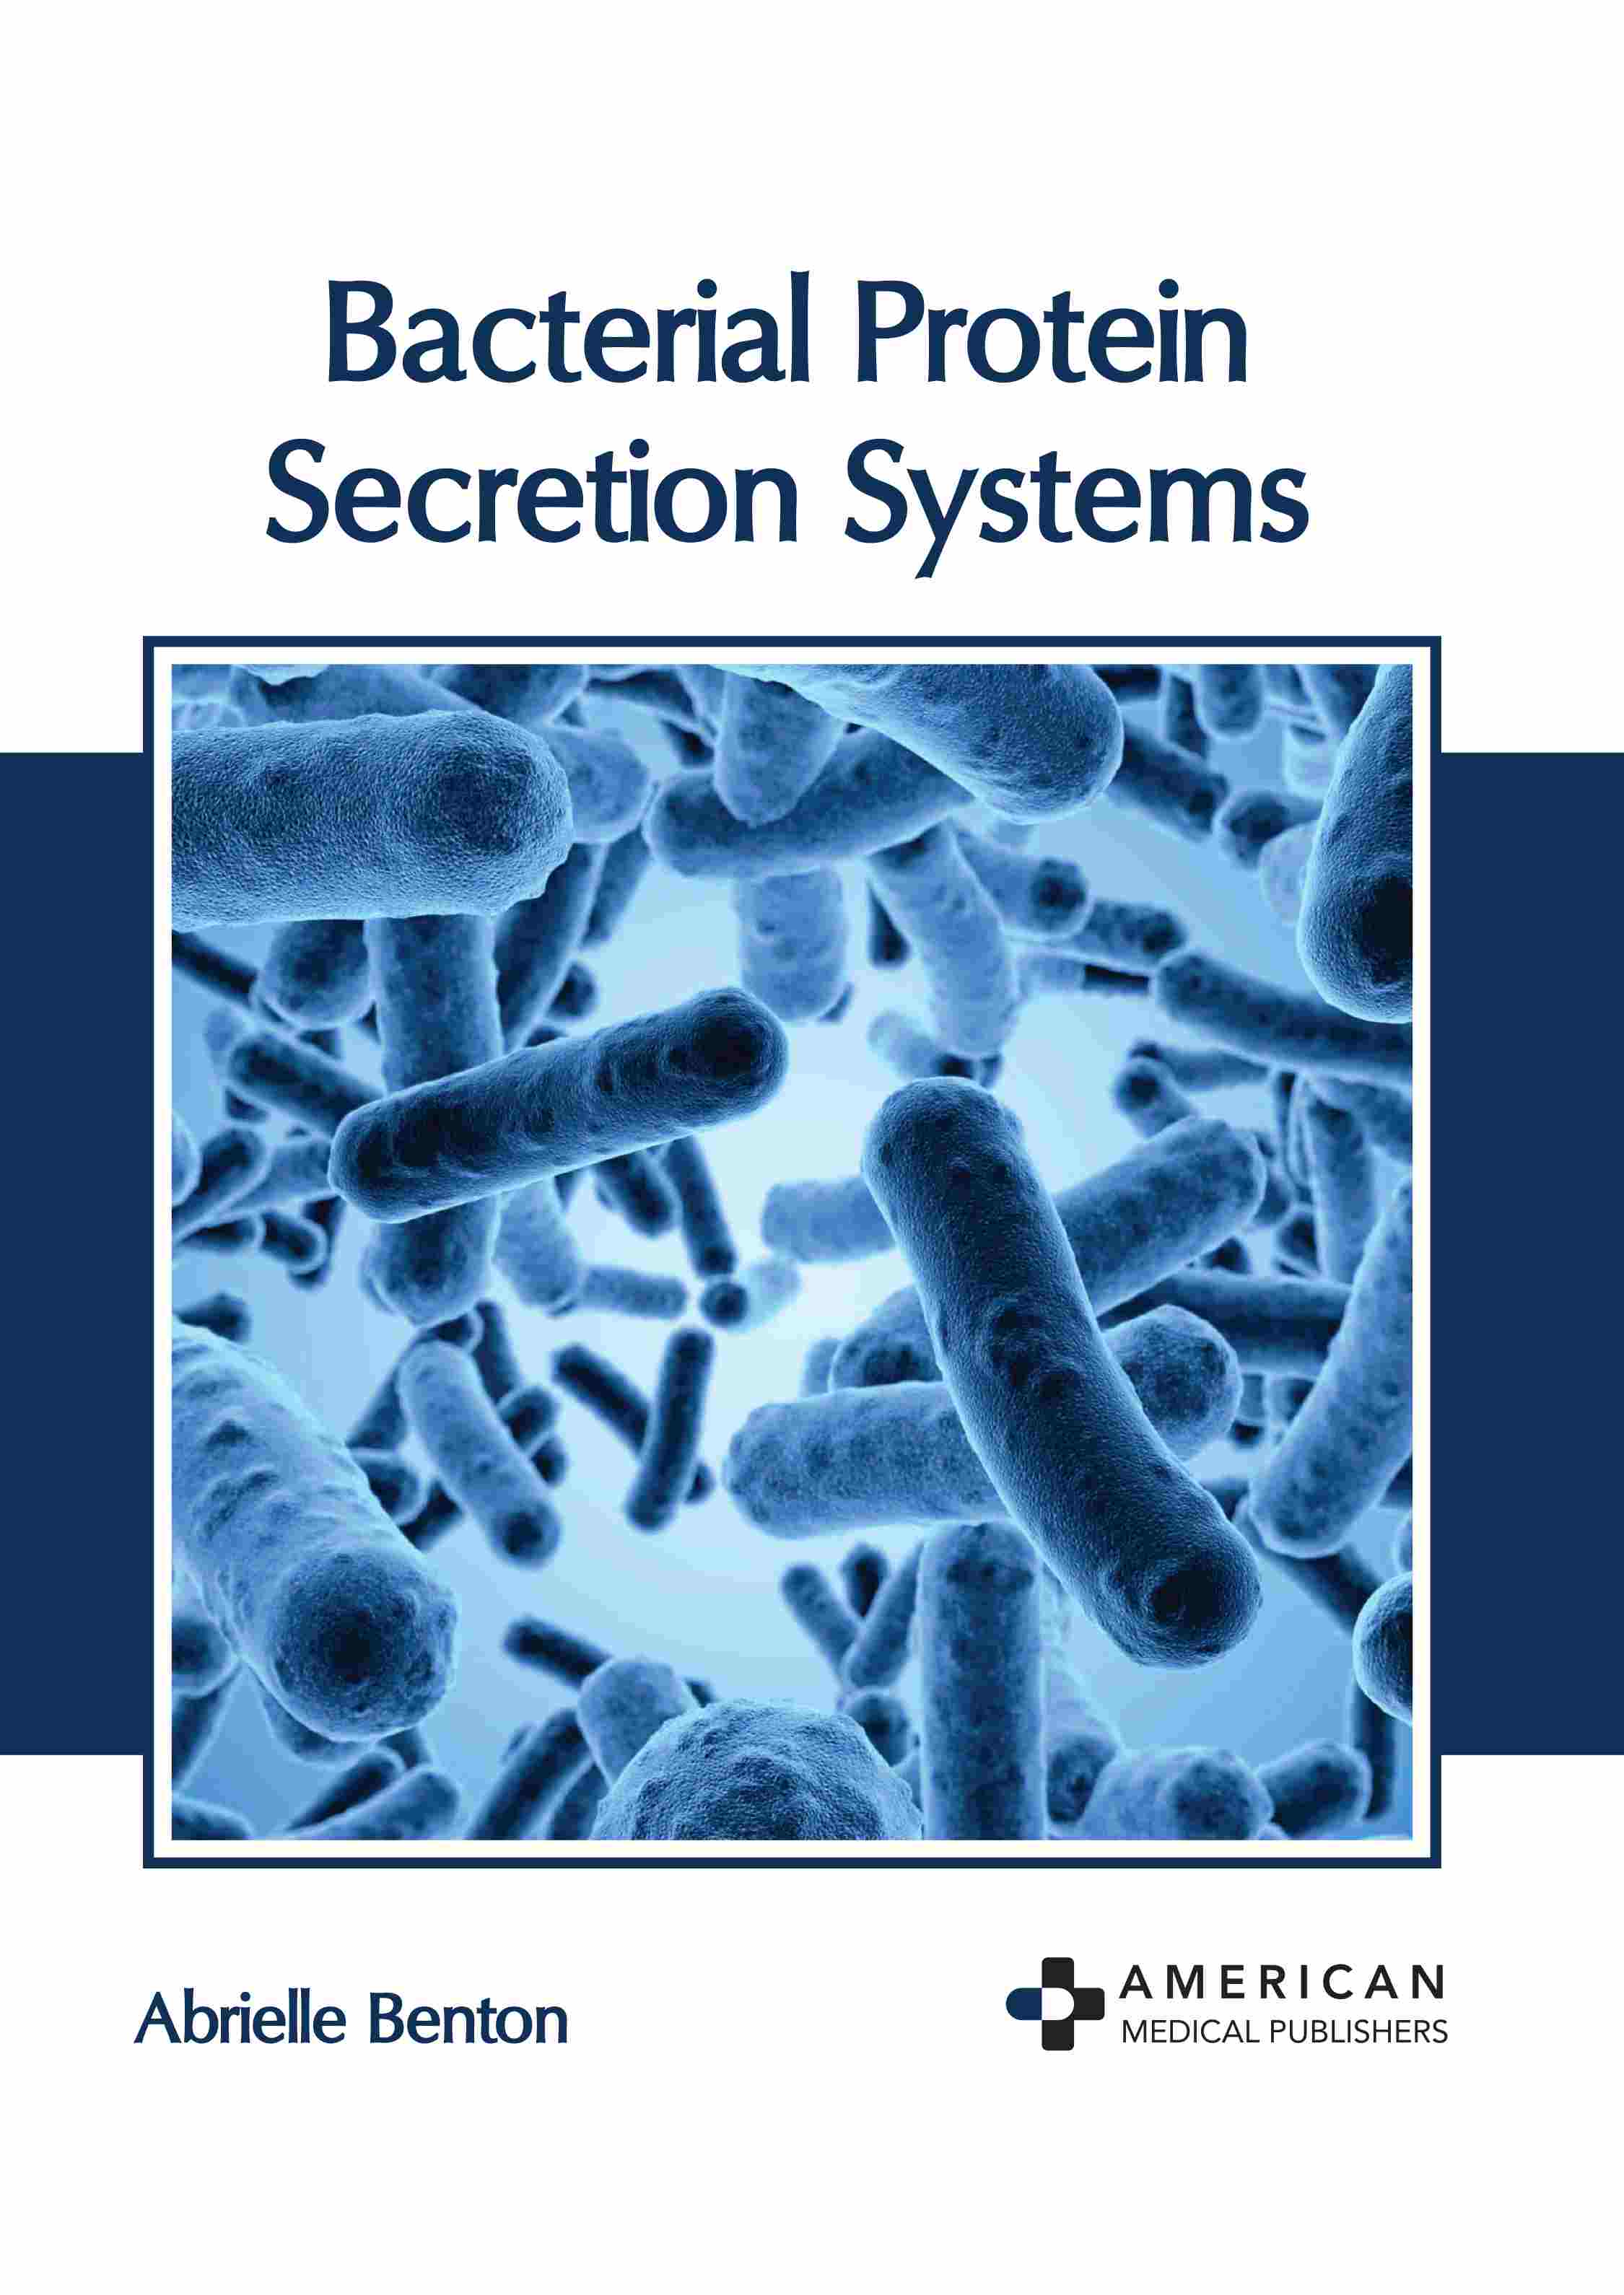 

exclusive-publishers/american-medical-publishers/bacterial-protein-secretion-systems-9781639279135